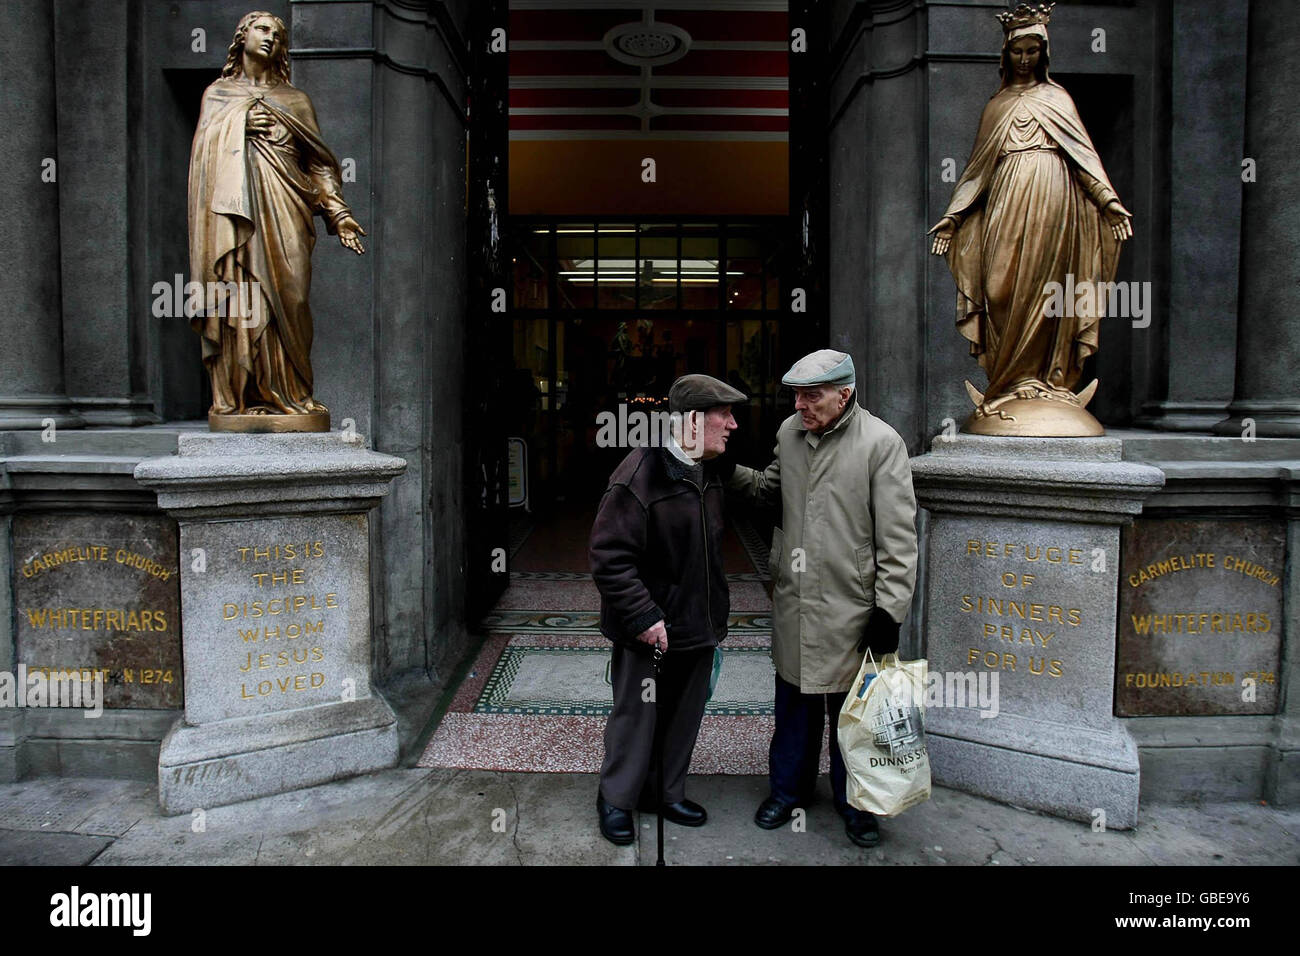 Two elderly gentlemen have a quiet chat after mass outside the Whitefriars Carmelite Church on Aungier Street, Dublin. Stock Photo